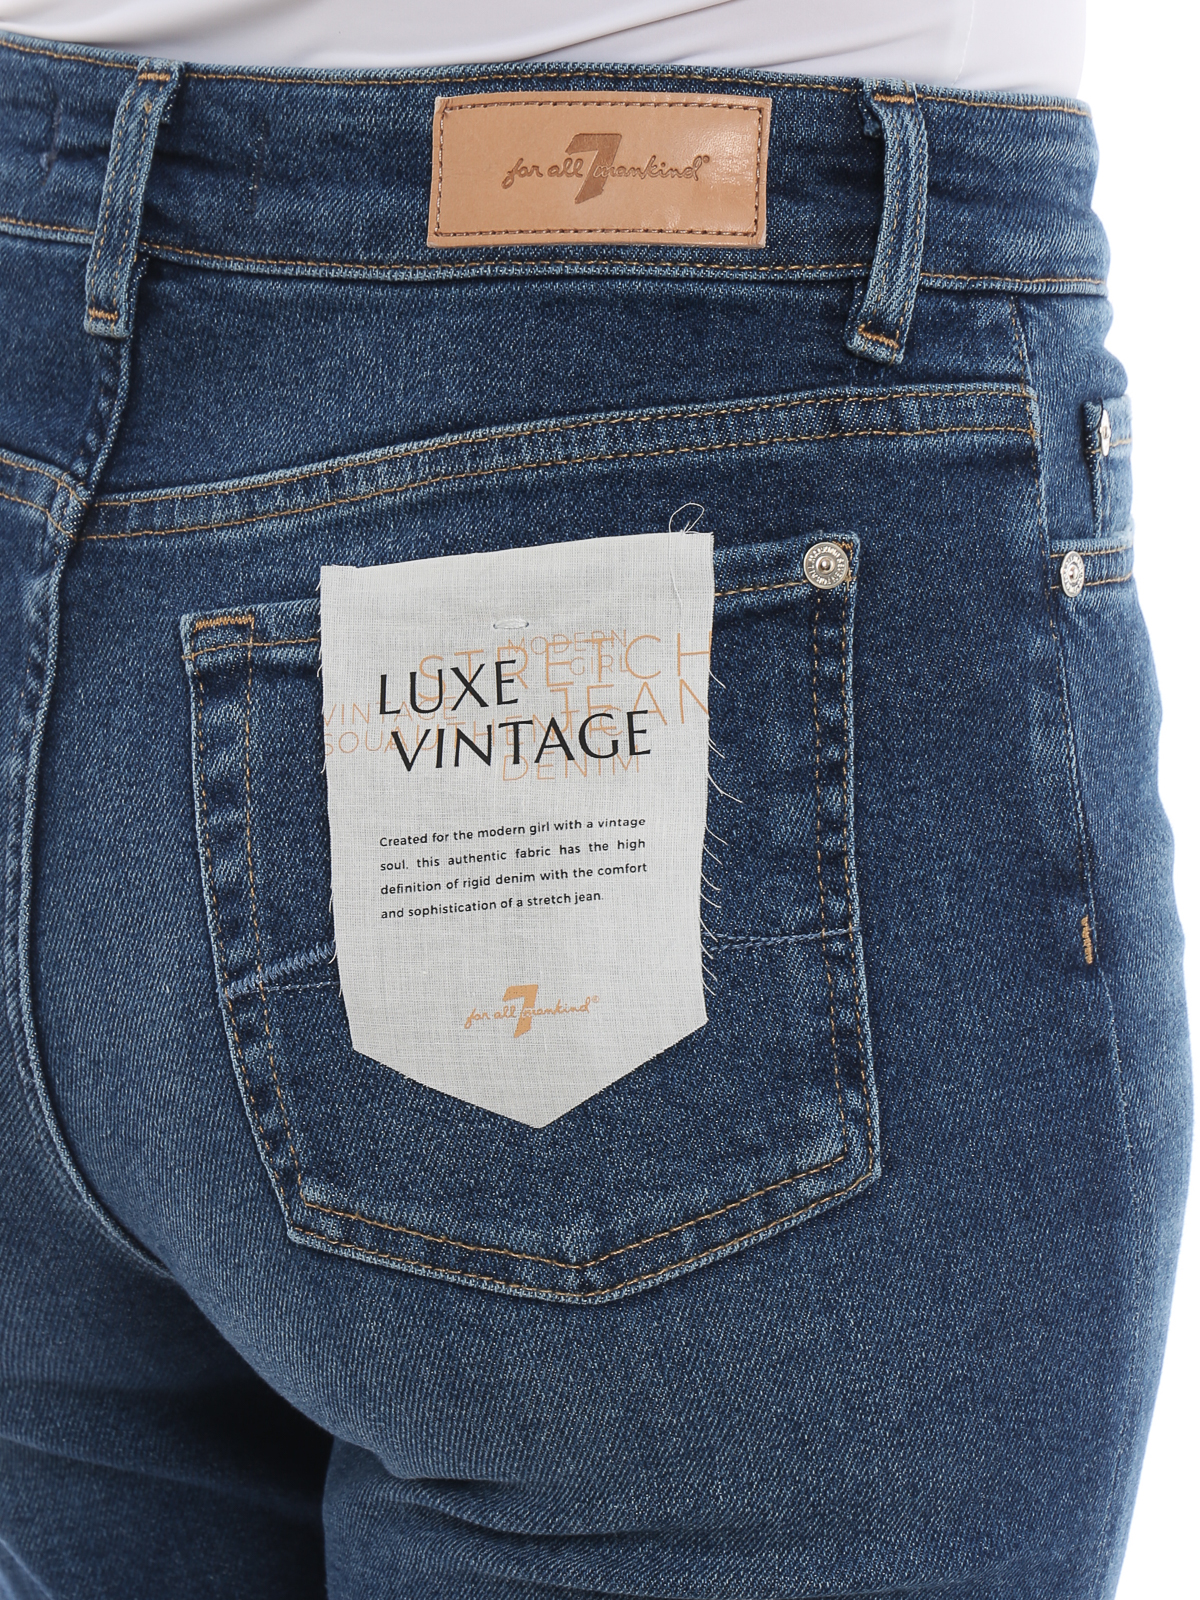 www seven for all mankind jeans